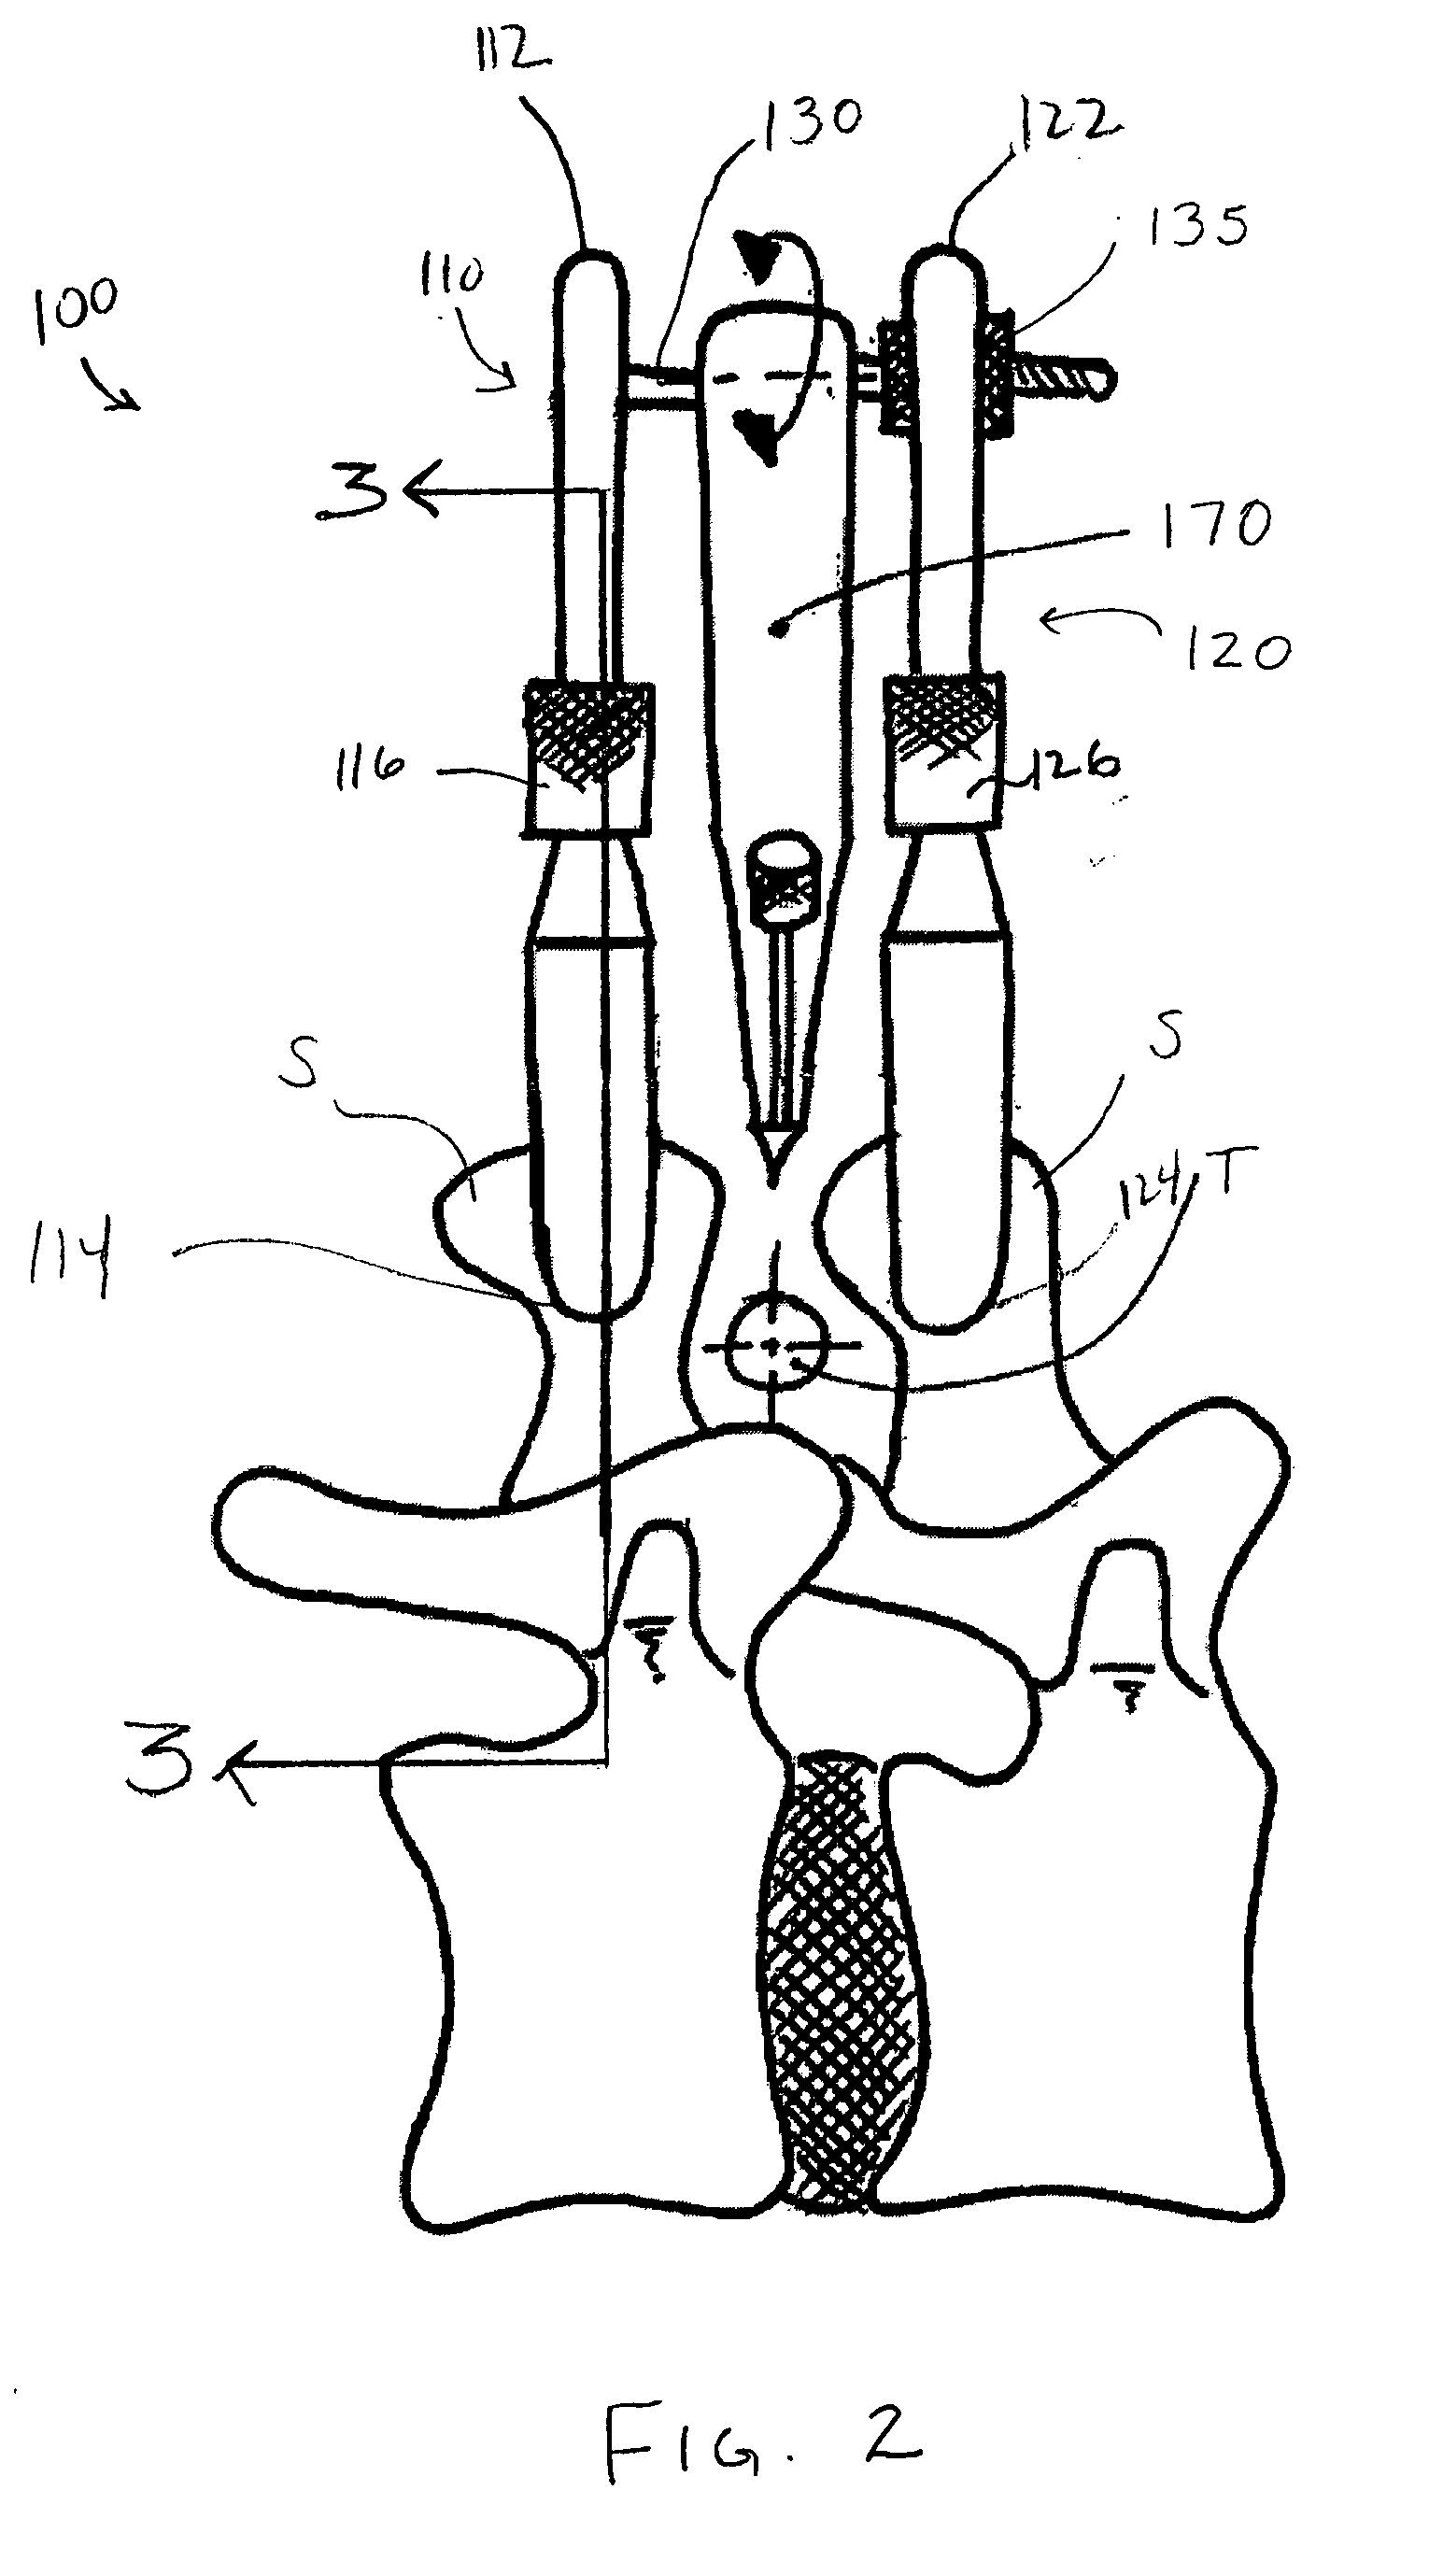 Apparatus and method for treatment of spinal conditions